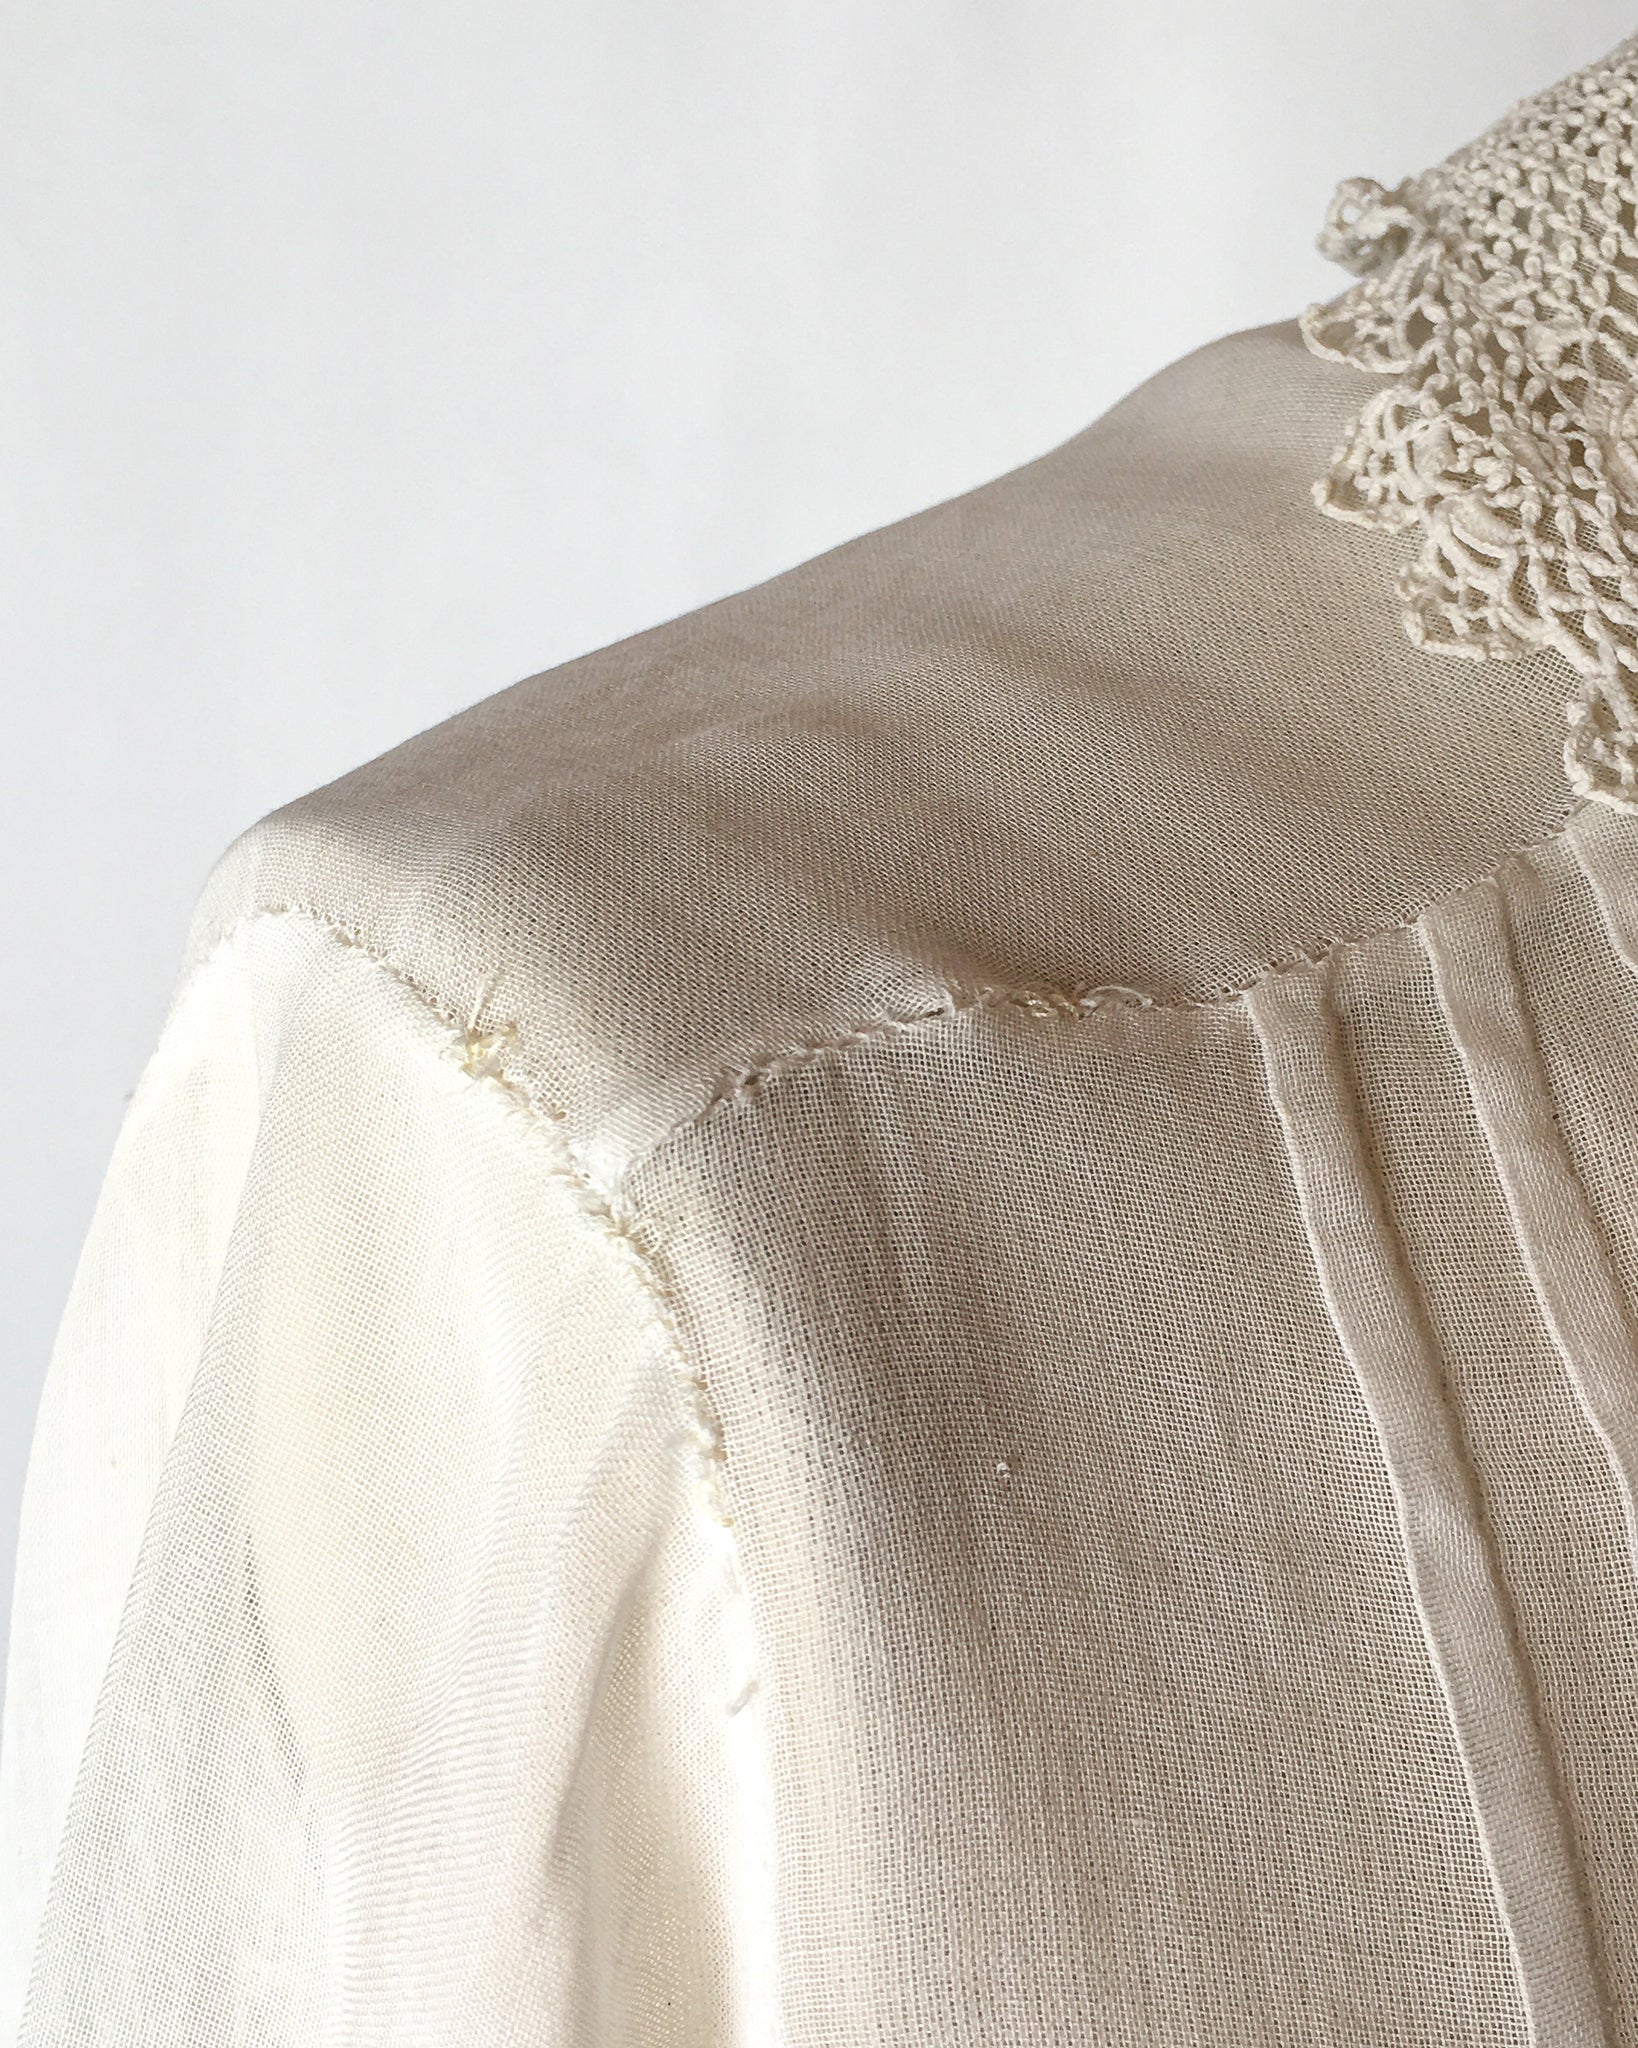 Edwardian Blouse – Carny Couture